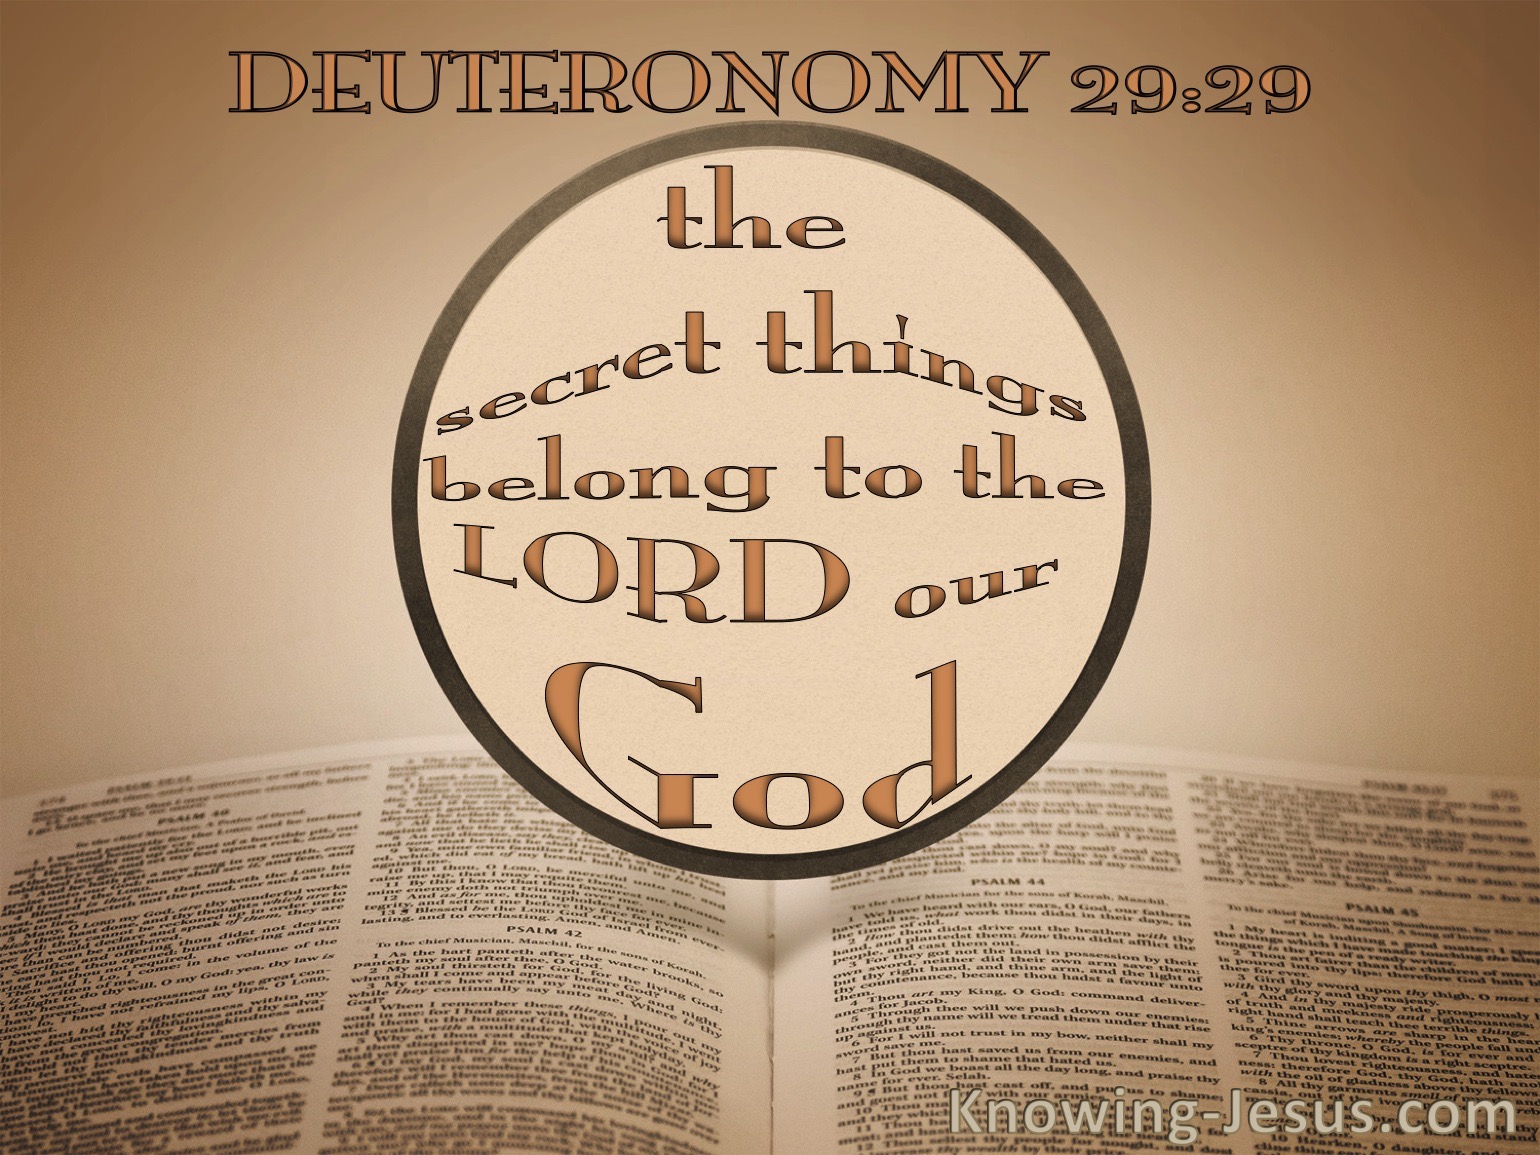 What Does Deuteronomy 29:29 Mean?